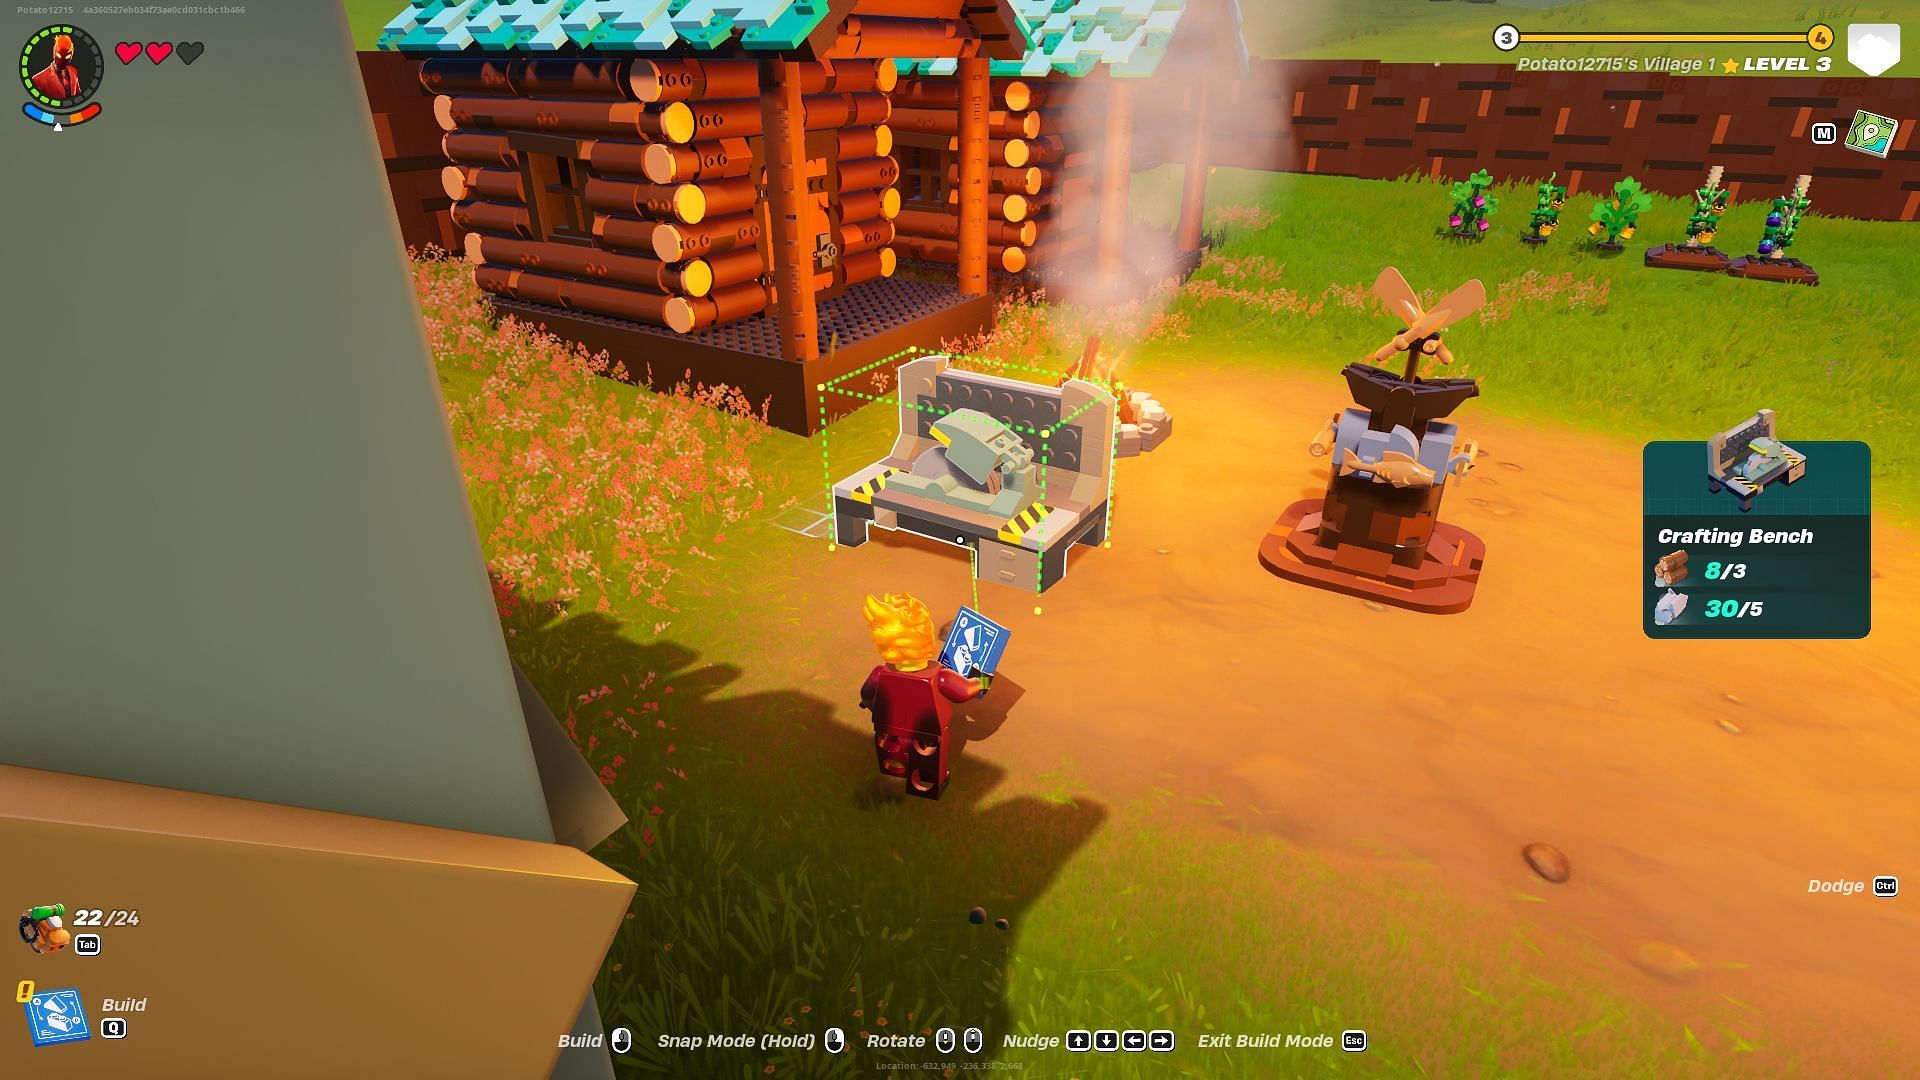 Build a Crafting Bench under shelter to use it when it rains (Image via Epic Games)